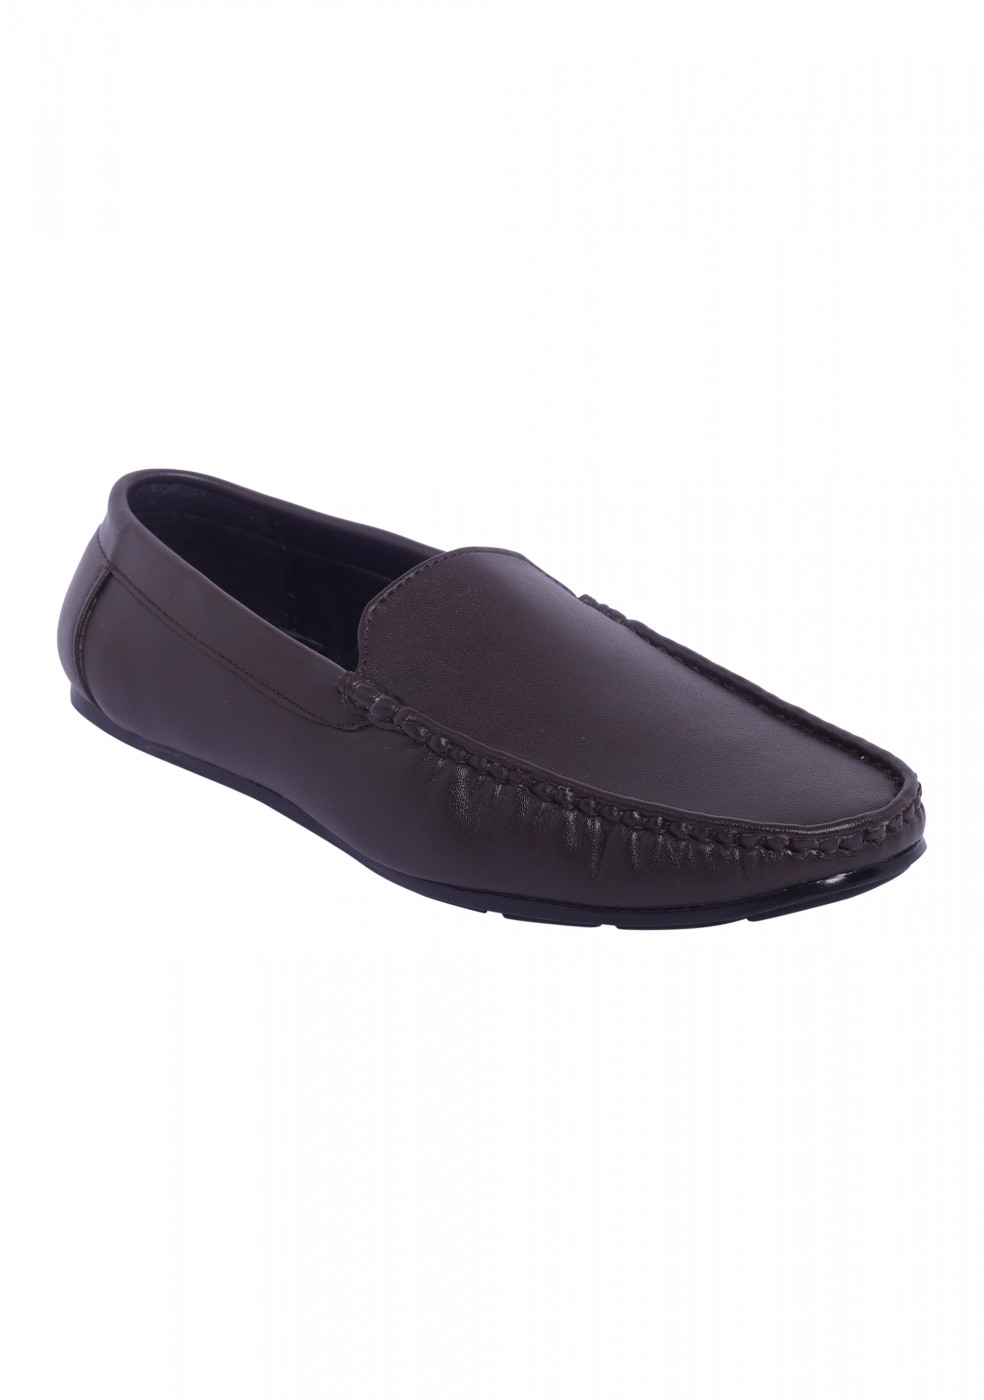 XSTOM Stylish Brown Casual Loafers For Men